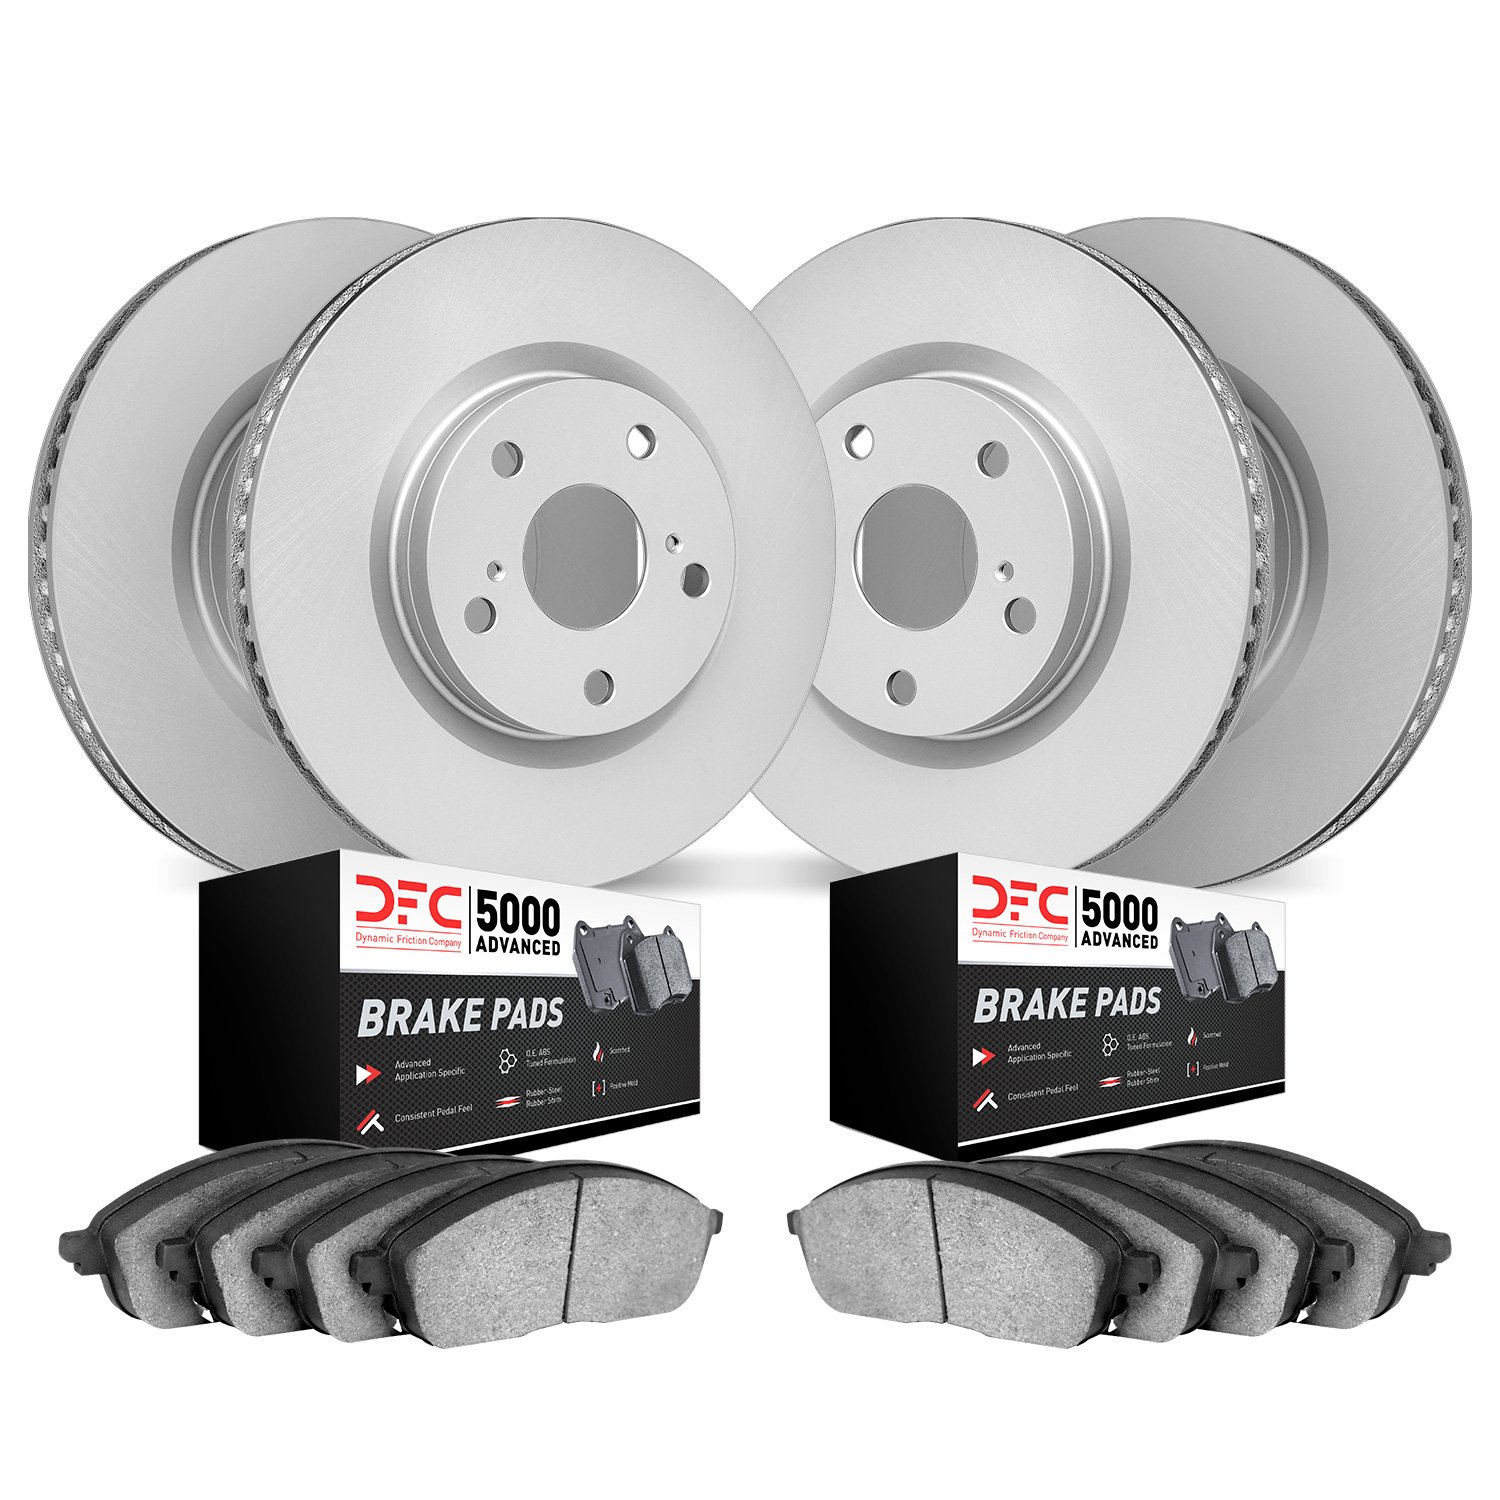 4504-46036 Geospec Brake Rotors w/5000 Advanced Brake Pads Kit, 2005-2010 GM, Position: Front and Rear